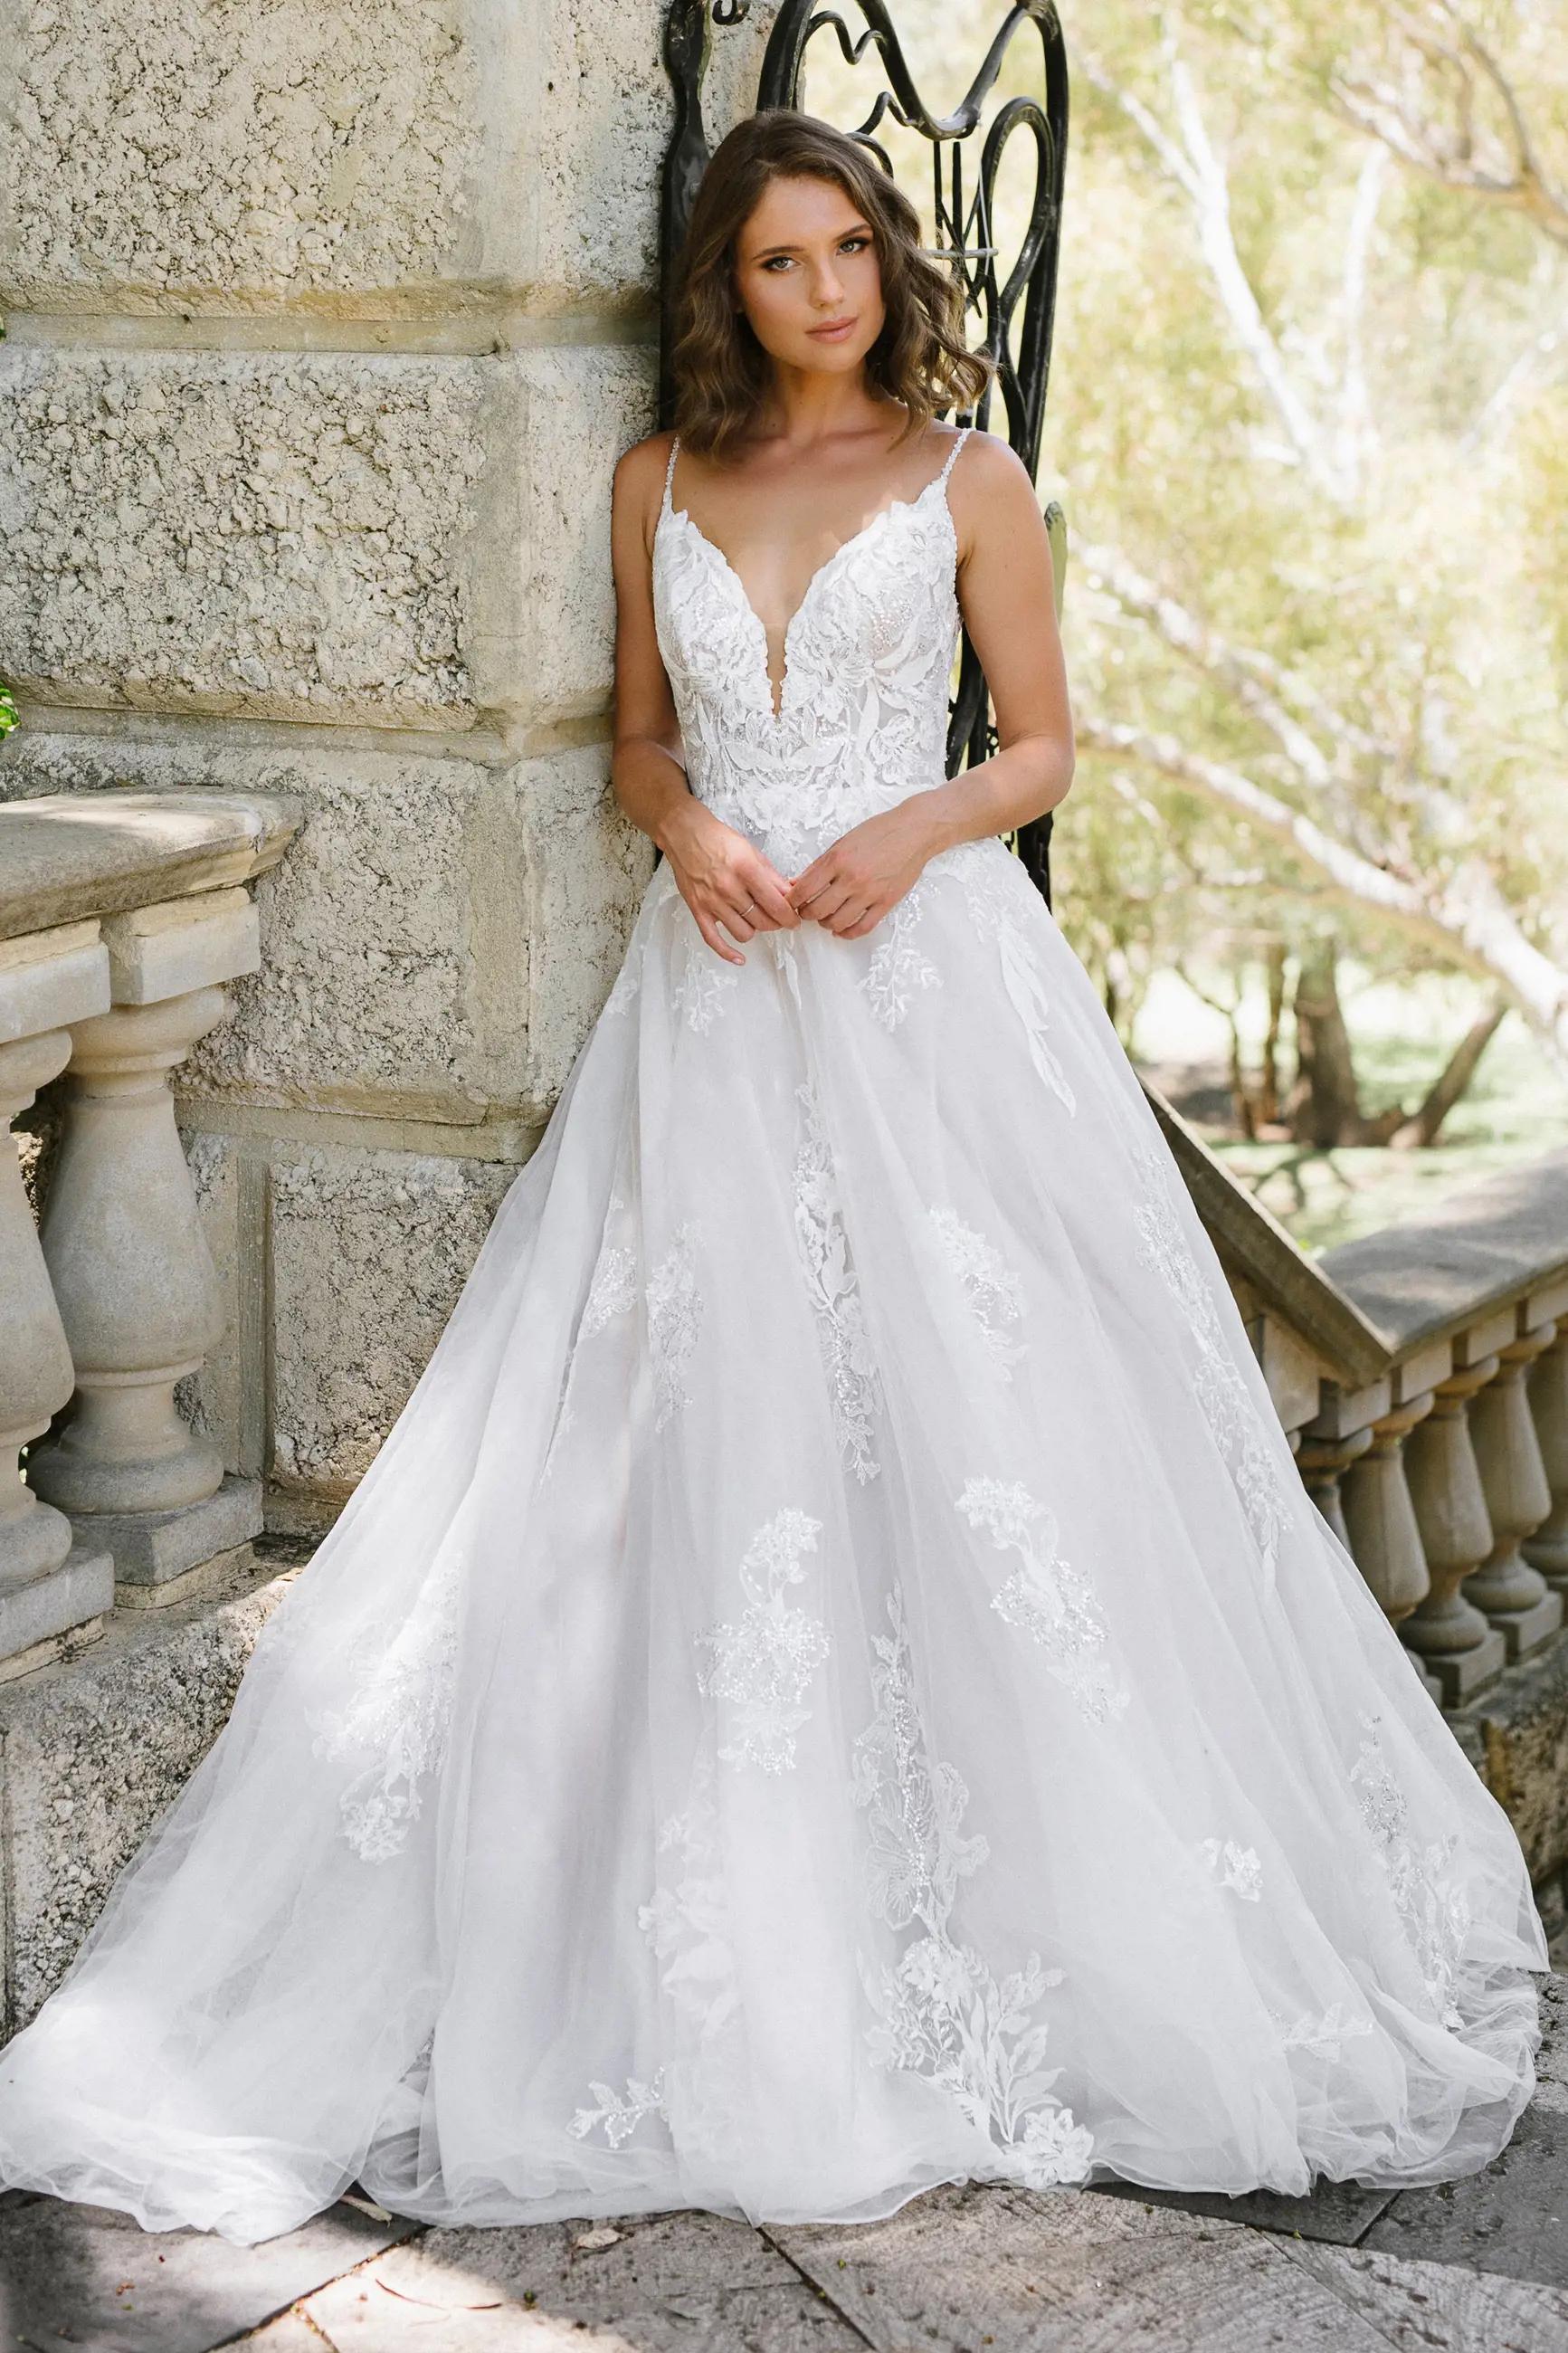 Magical A-Line Wedding Dress with Dramatic Low Back Savannah $1 autoplay mute thumbnail